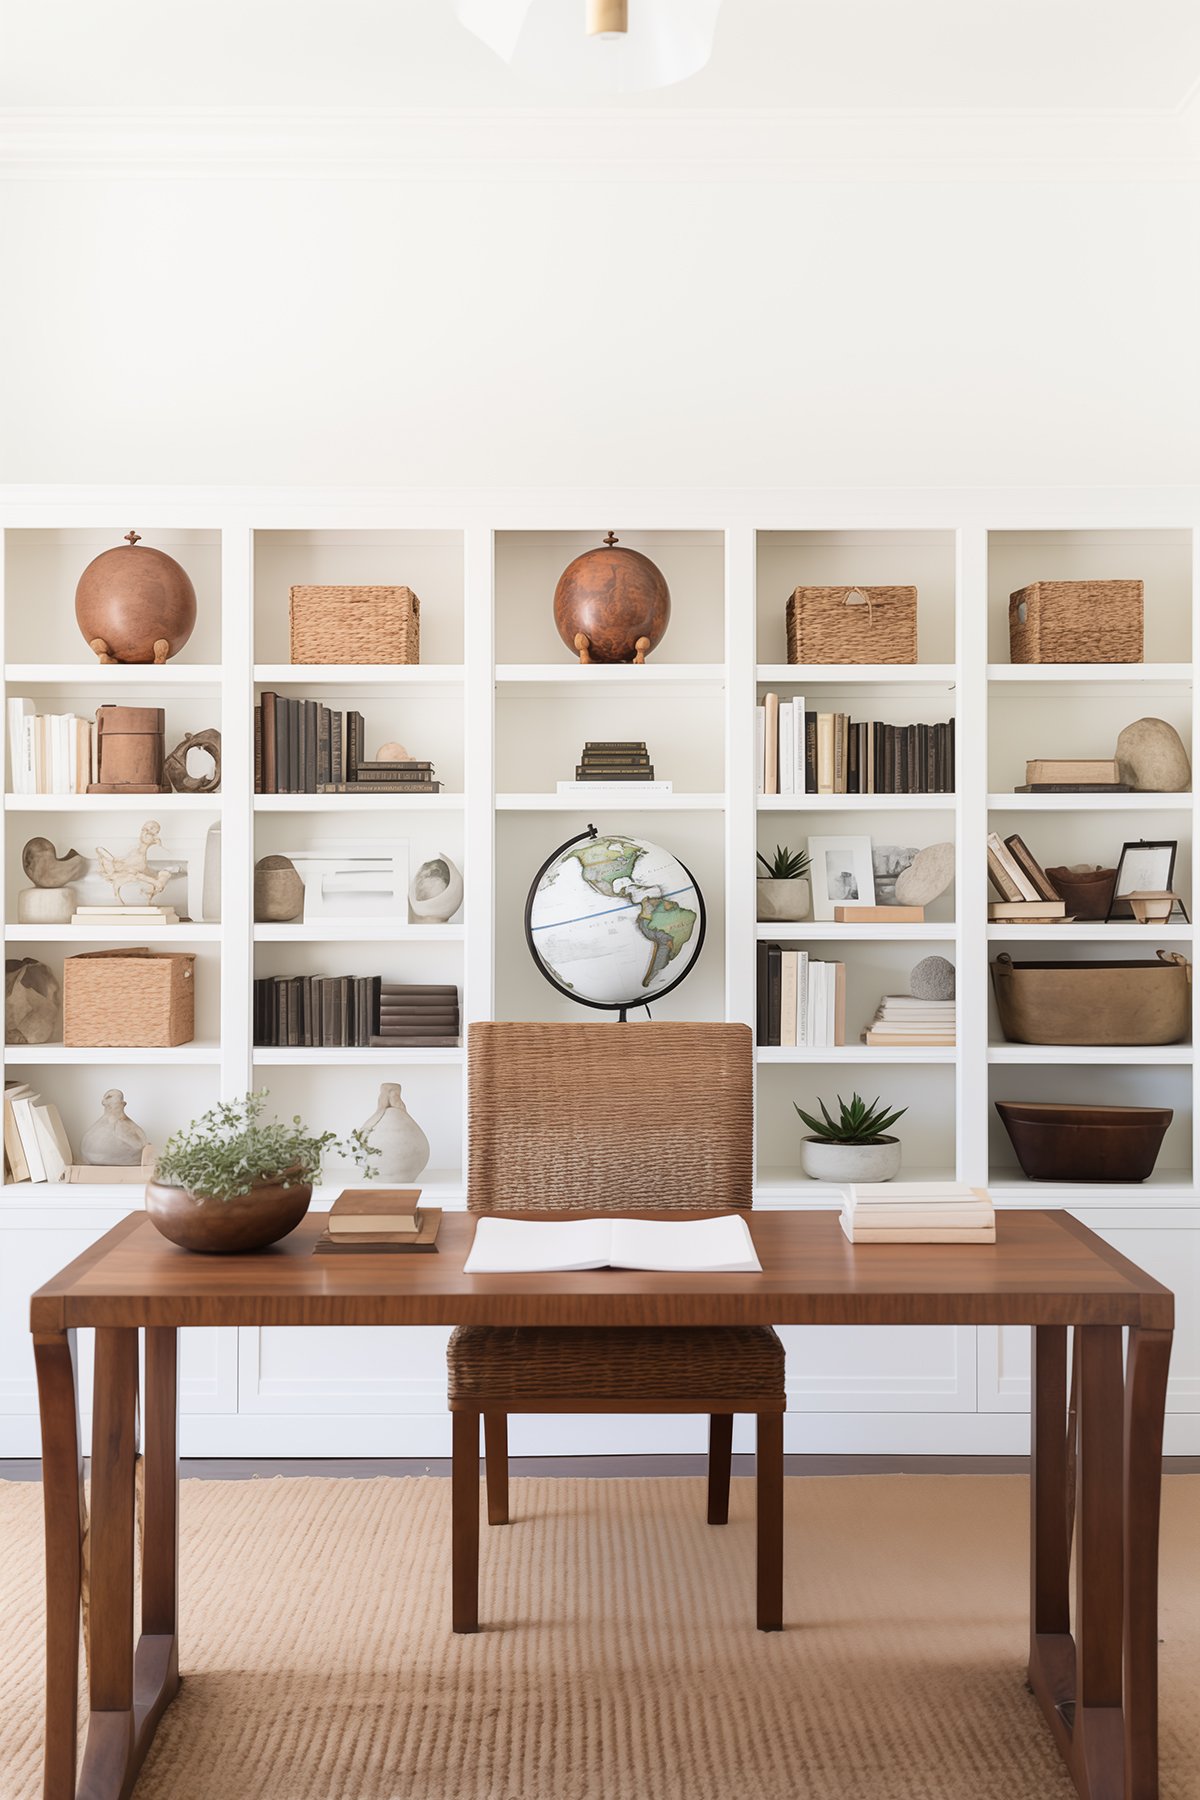 Home office with a wooden desk, rattan chair, and white shelves decorated with global artifacts.